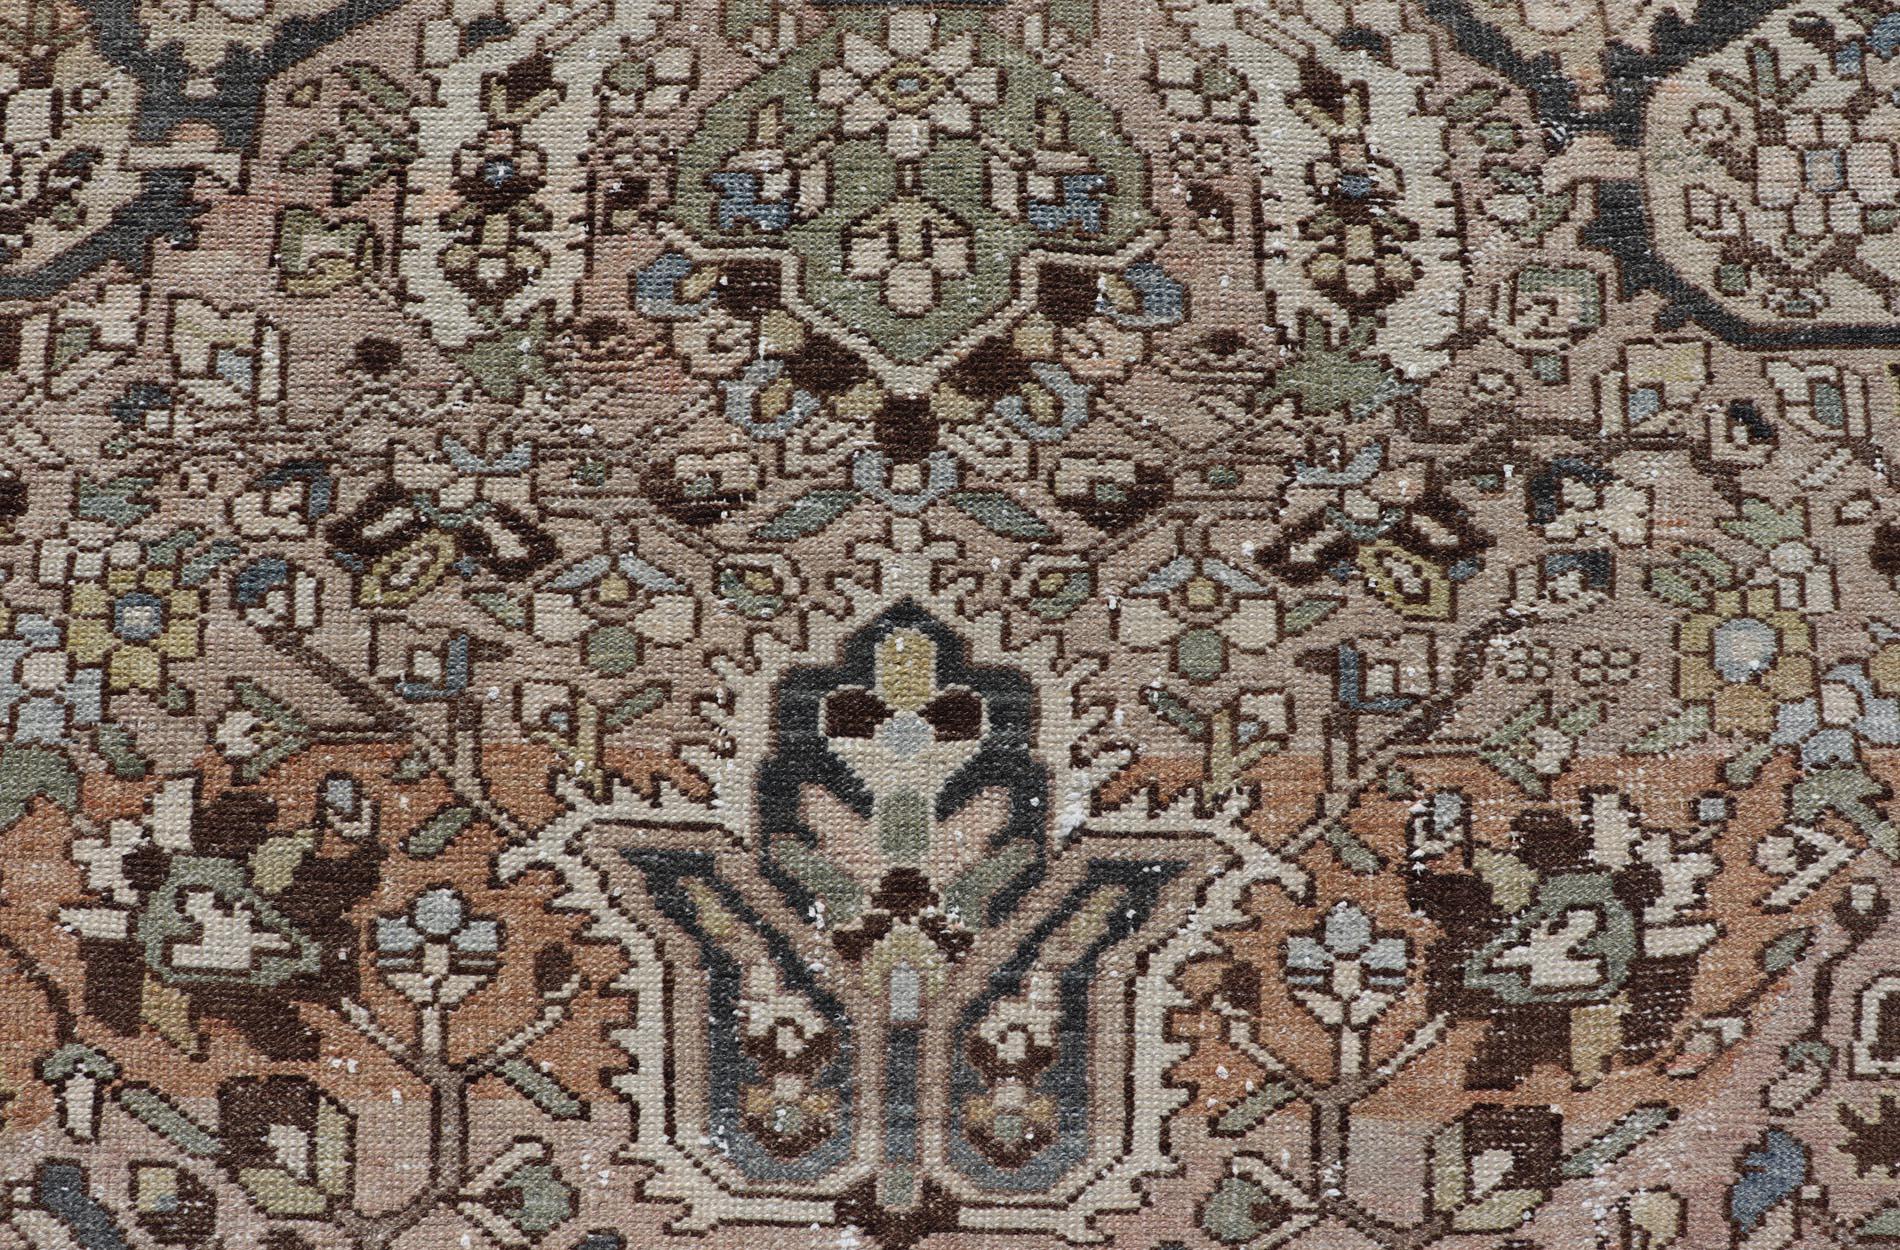 Square Antique Persian Bakhtiari Rug with Large Ornate Central Medallion Design. Keivan Woven Arts / Rug/W22-0206, antique Bakhtiari Mid-20th Century Origin / Iran 
Measures: 12'4 x 12'6 
This multicolored Persian Bakhtiari rug features a central